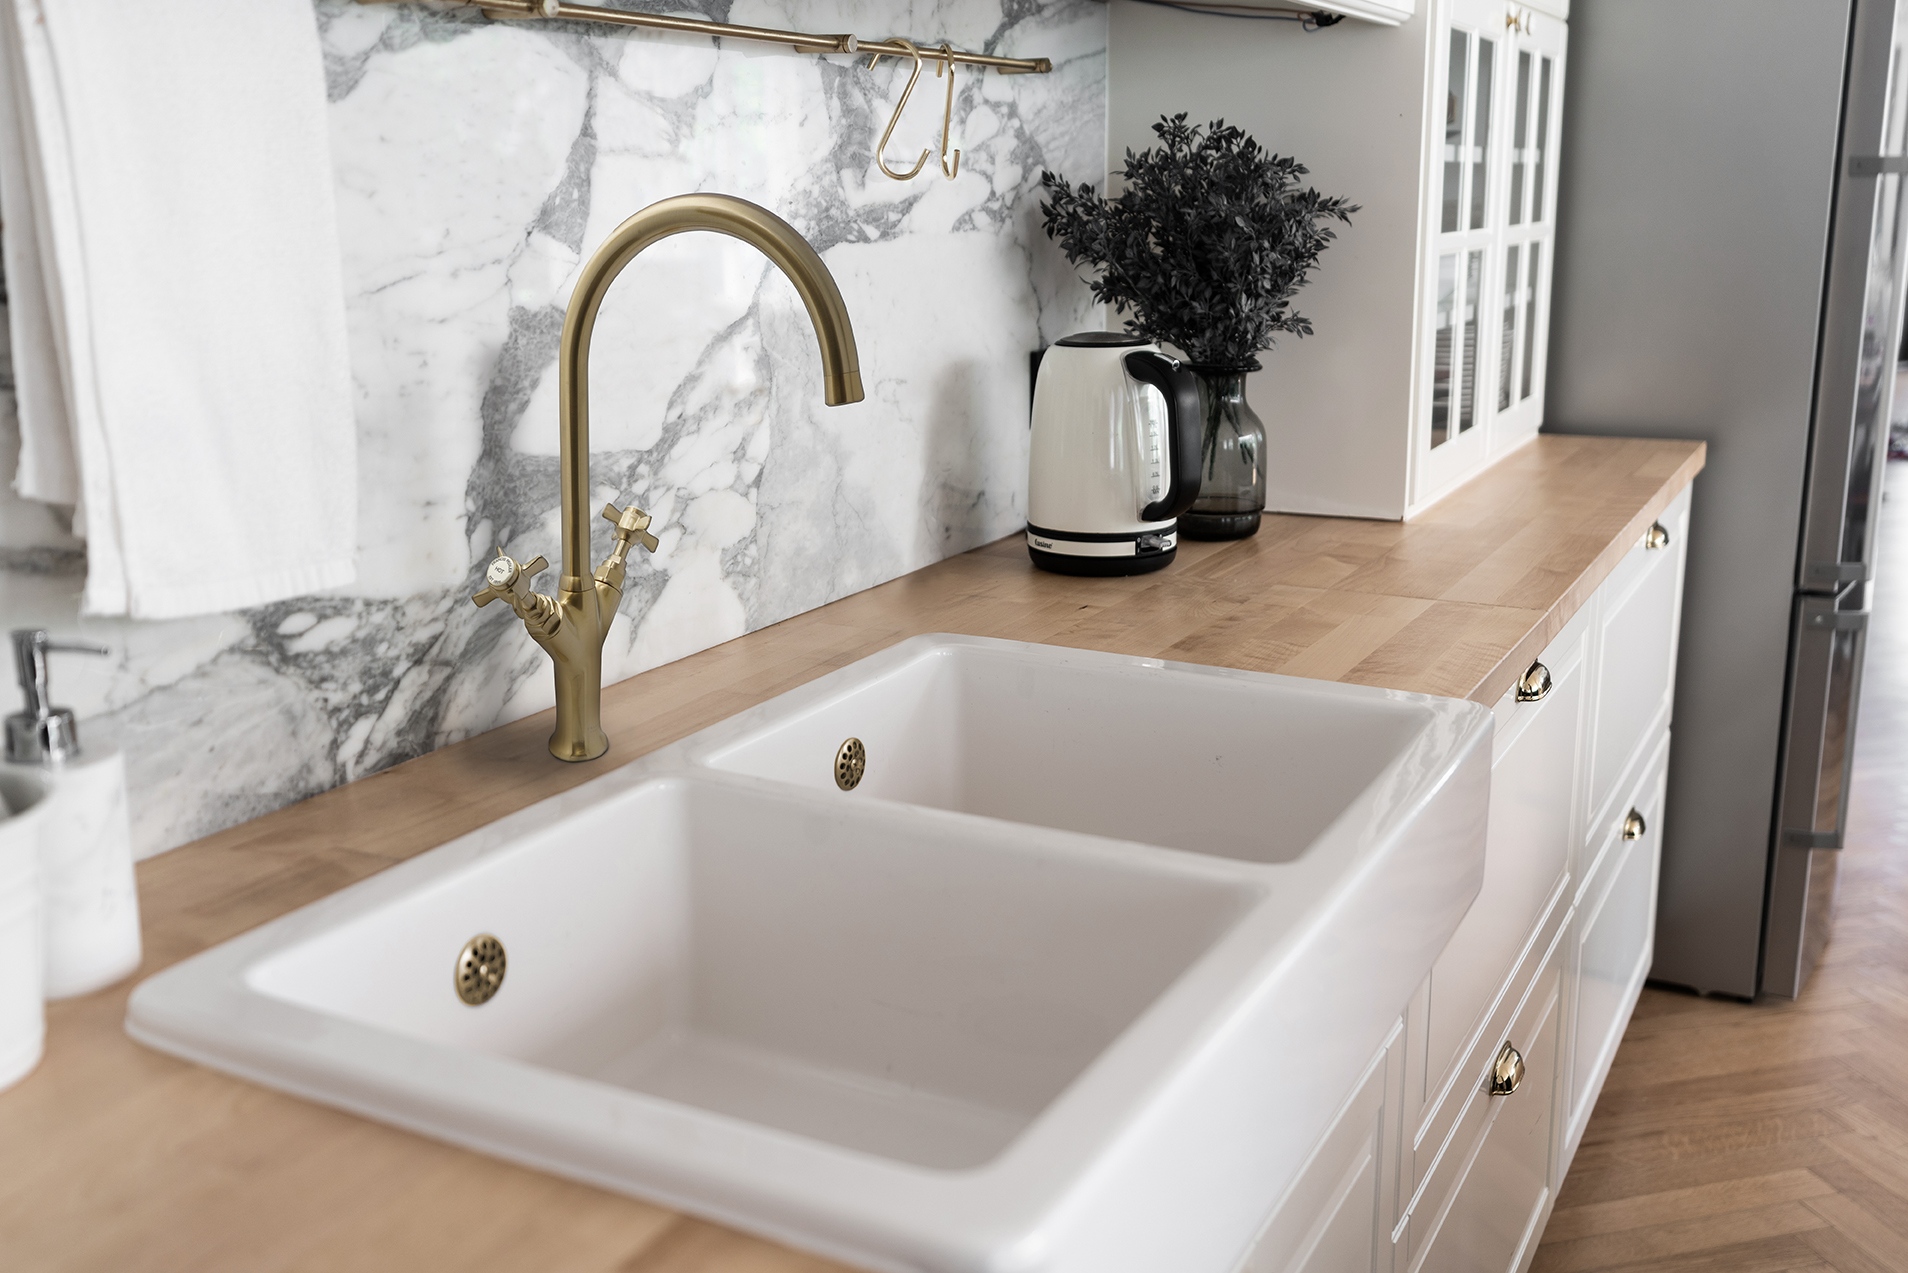 Introducing a stunning collection of new coloured taps 